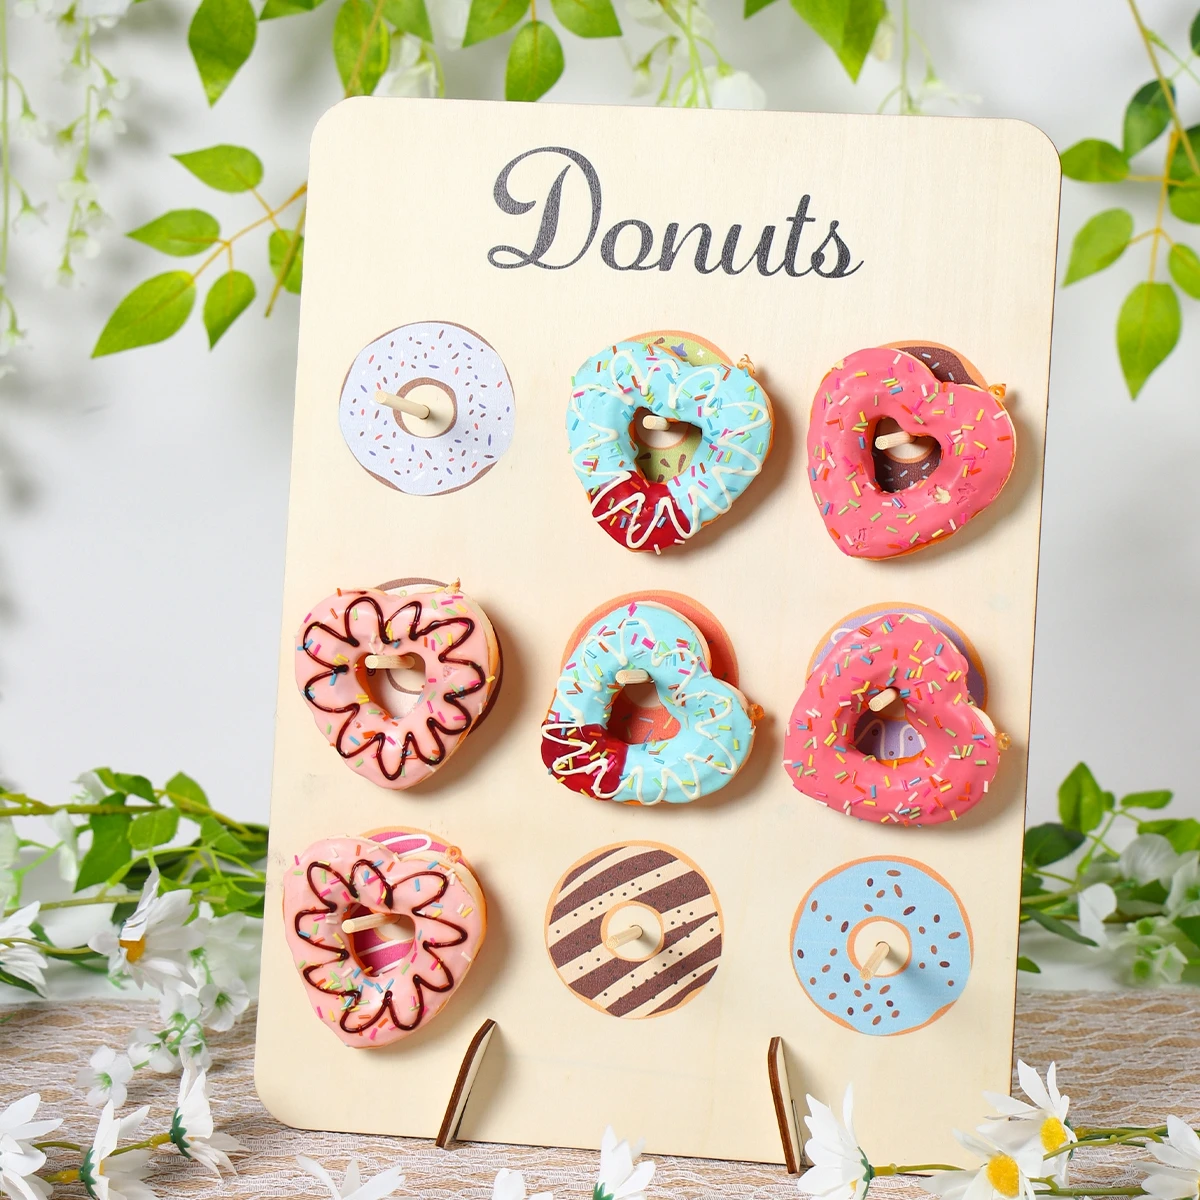 

Wooden Donut Wall Stands Holder Rustic Wedding Decoration Doughnut Display Kids Happy Birthday Party Decor Baby Shower Supplies